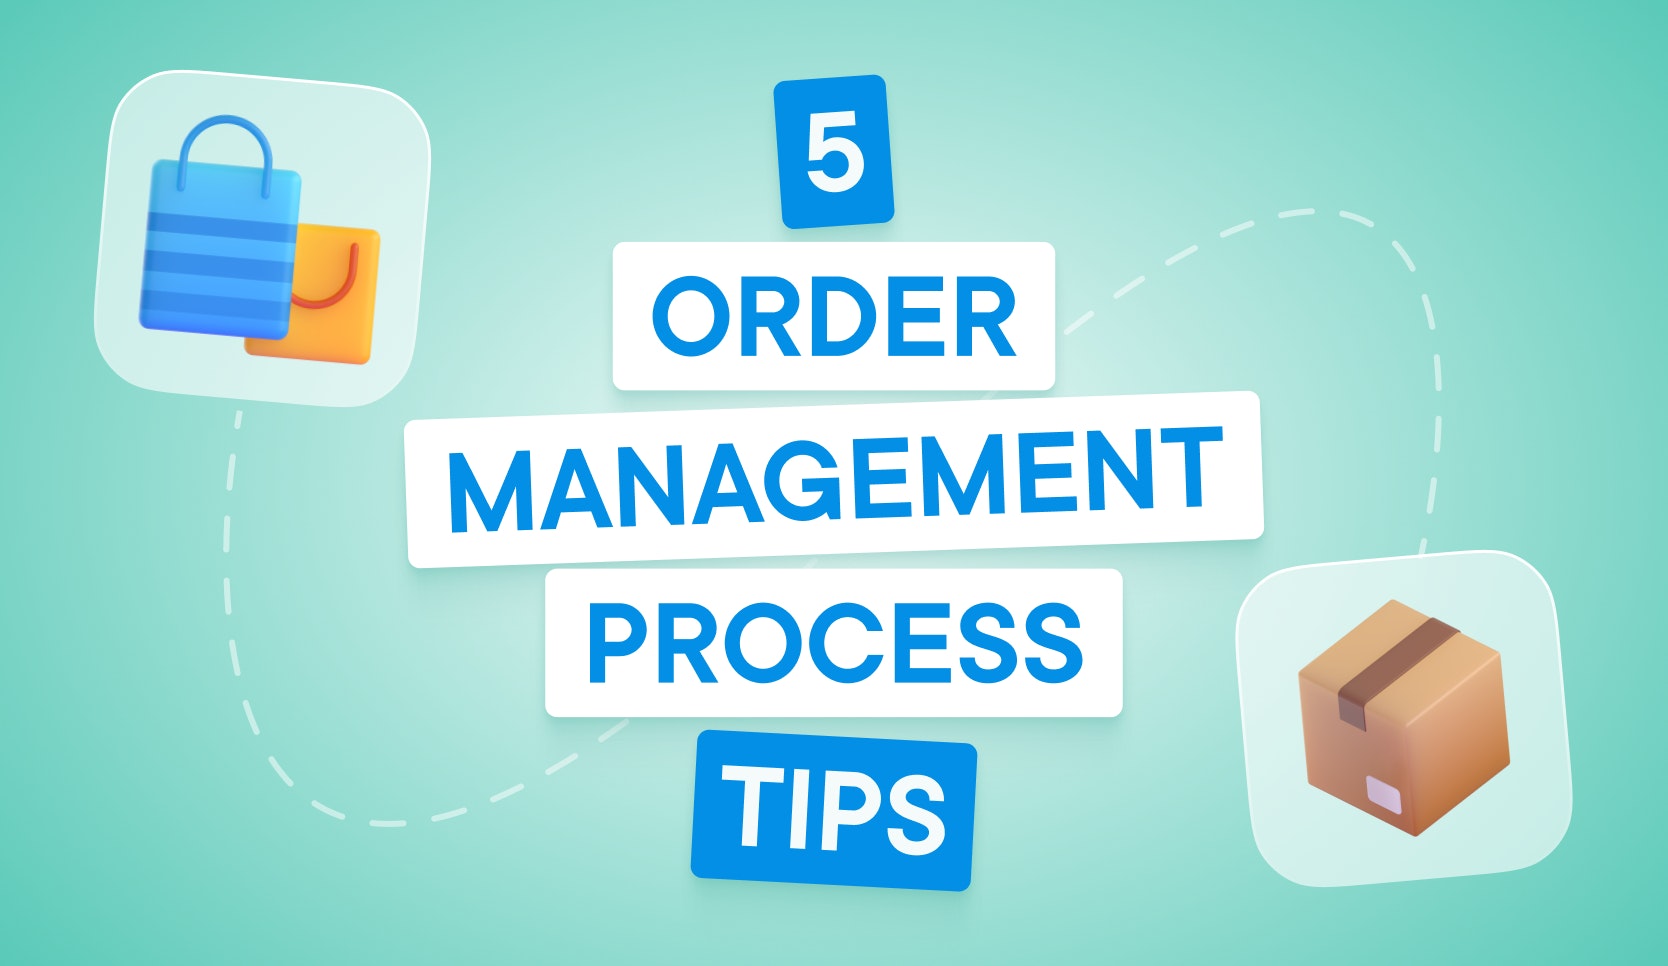 5 tips for how to improve your order management process